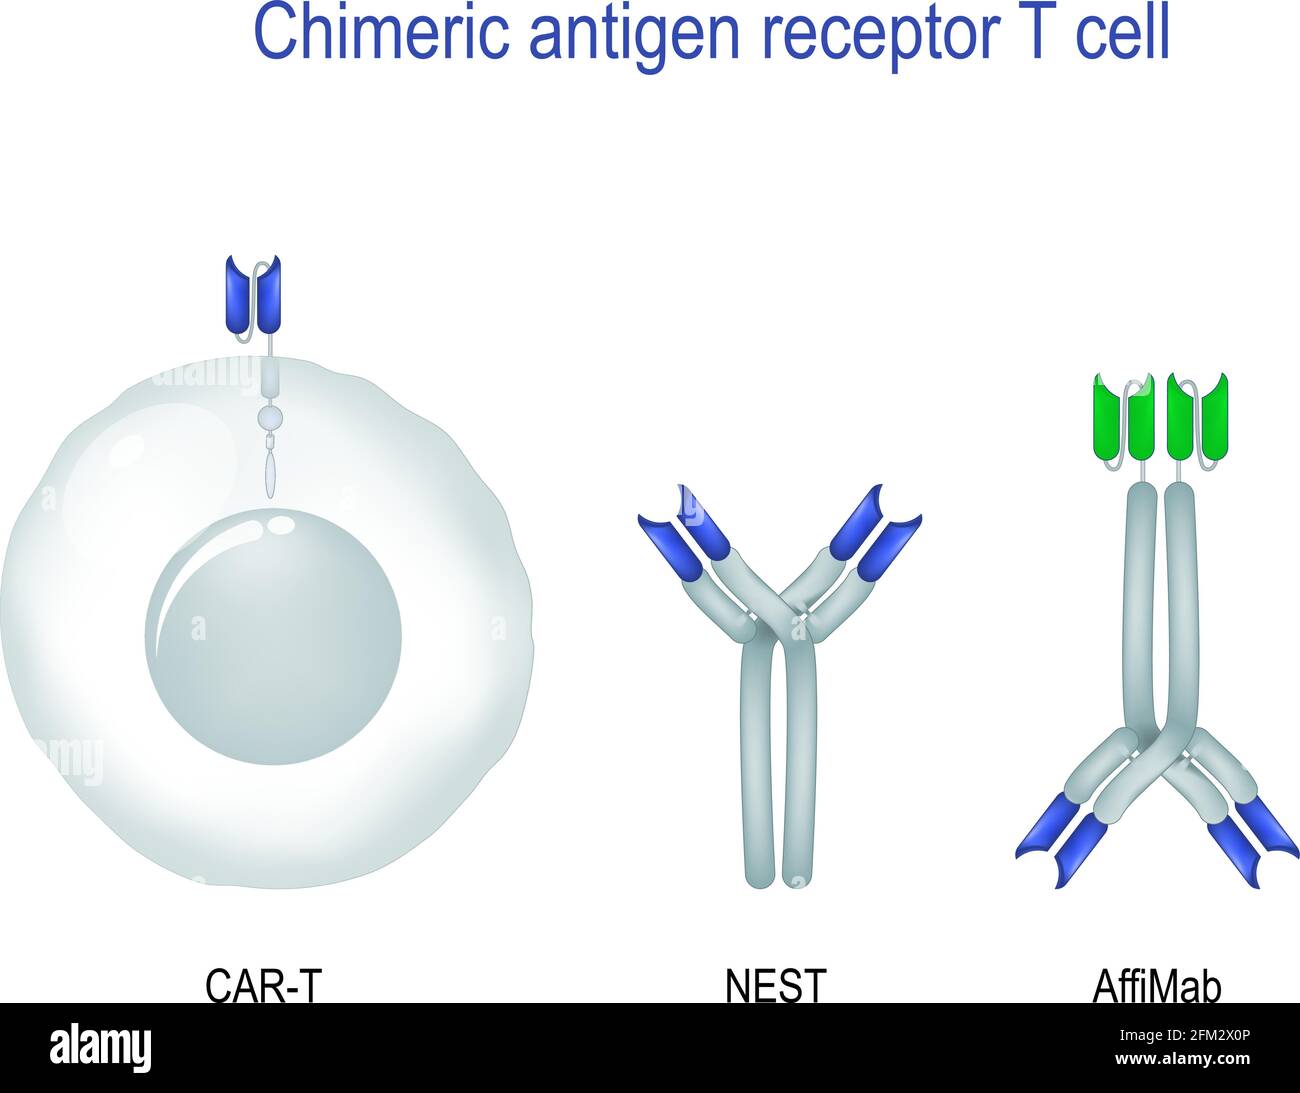 Chimeric antigen receptor T cell. immunotherapy for cancer. Cancer treatment. equipped of CAR T-cells that can recognize and fight the infected tumor Stock Vector